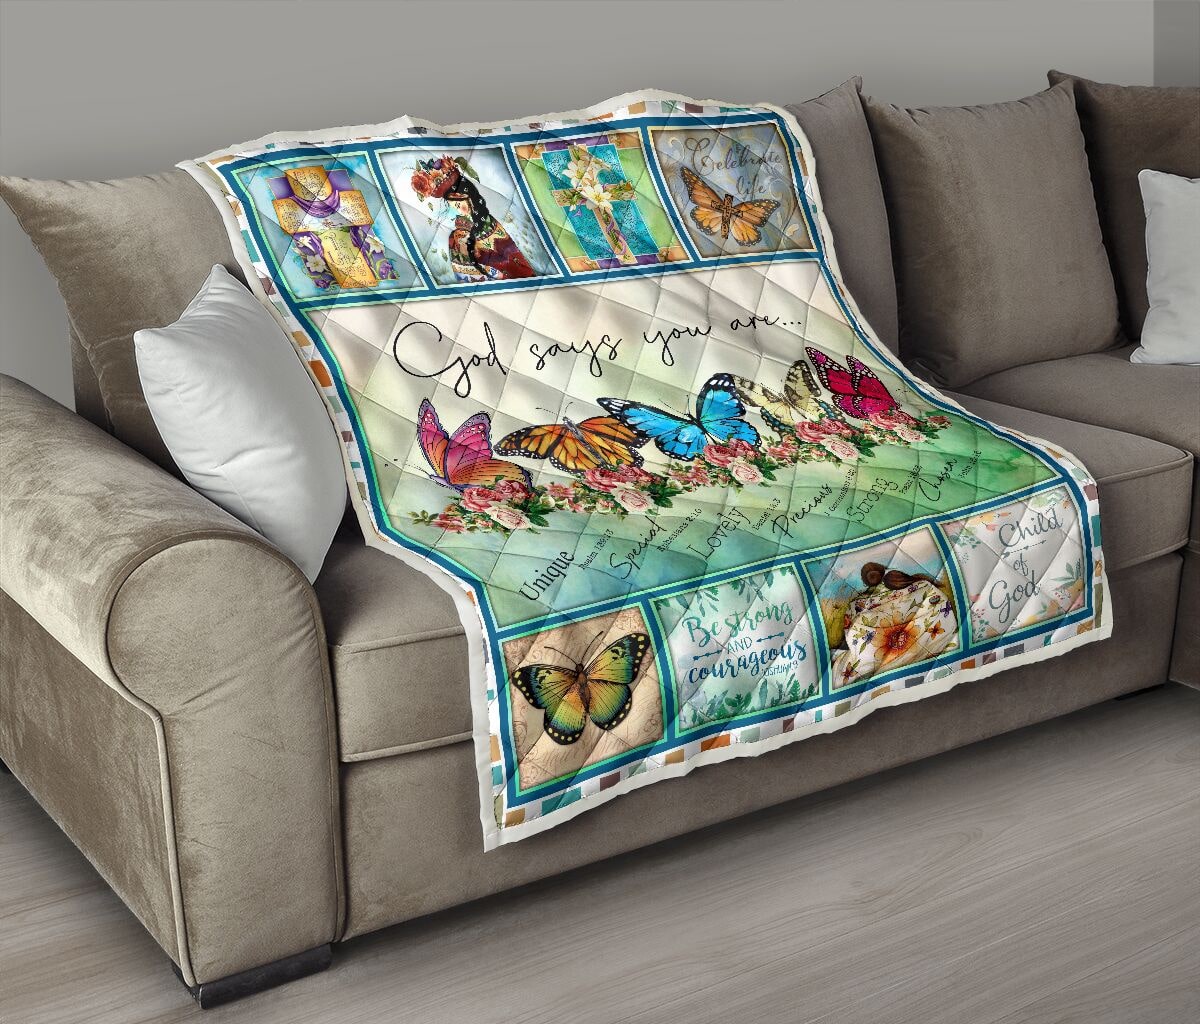 God say you are cross butterfly floral full printing quilt 3